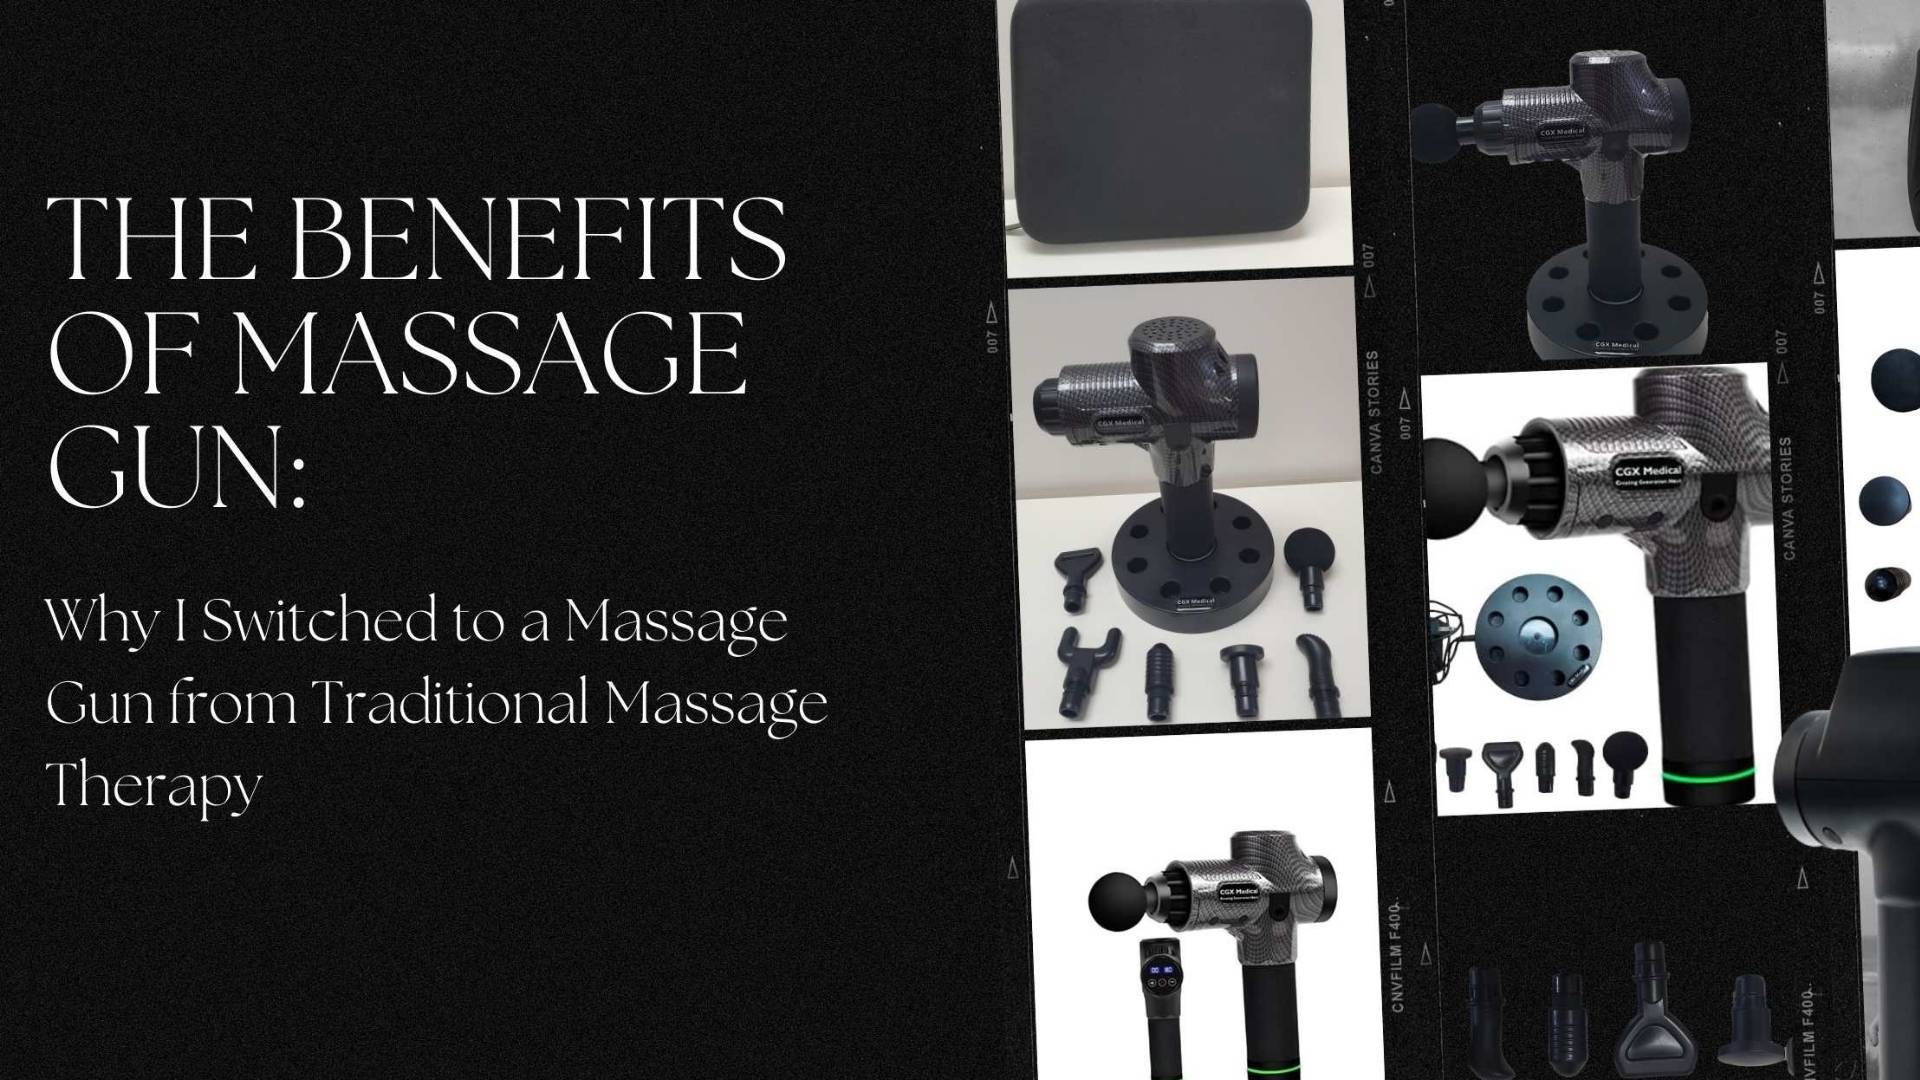 The Benefits of Massage Gun: Why I Switched to a Massage Gun from Traditional Massage Therapy